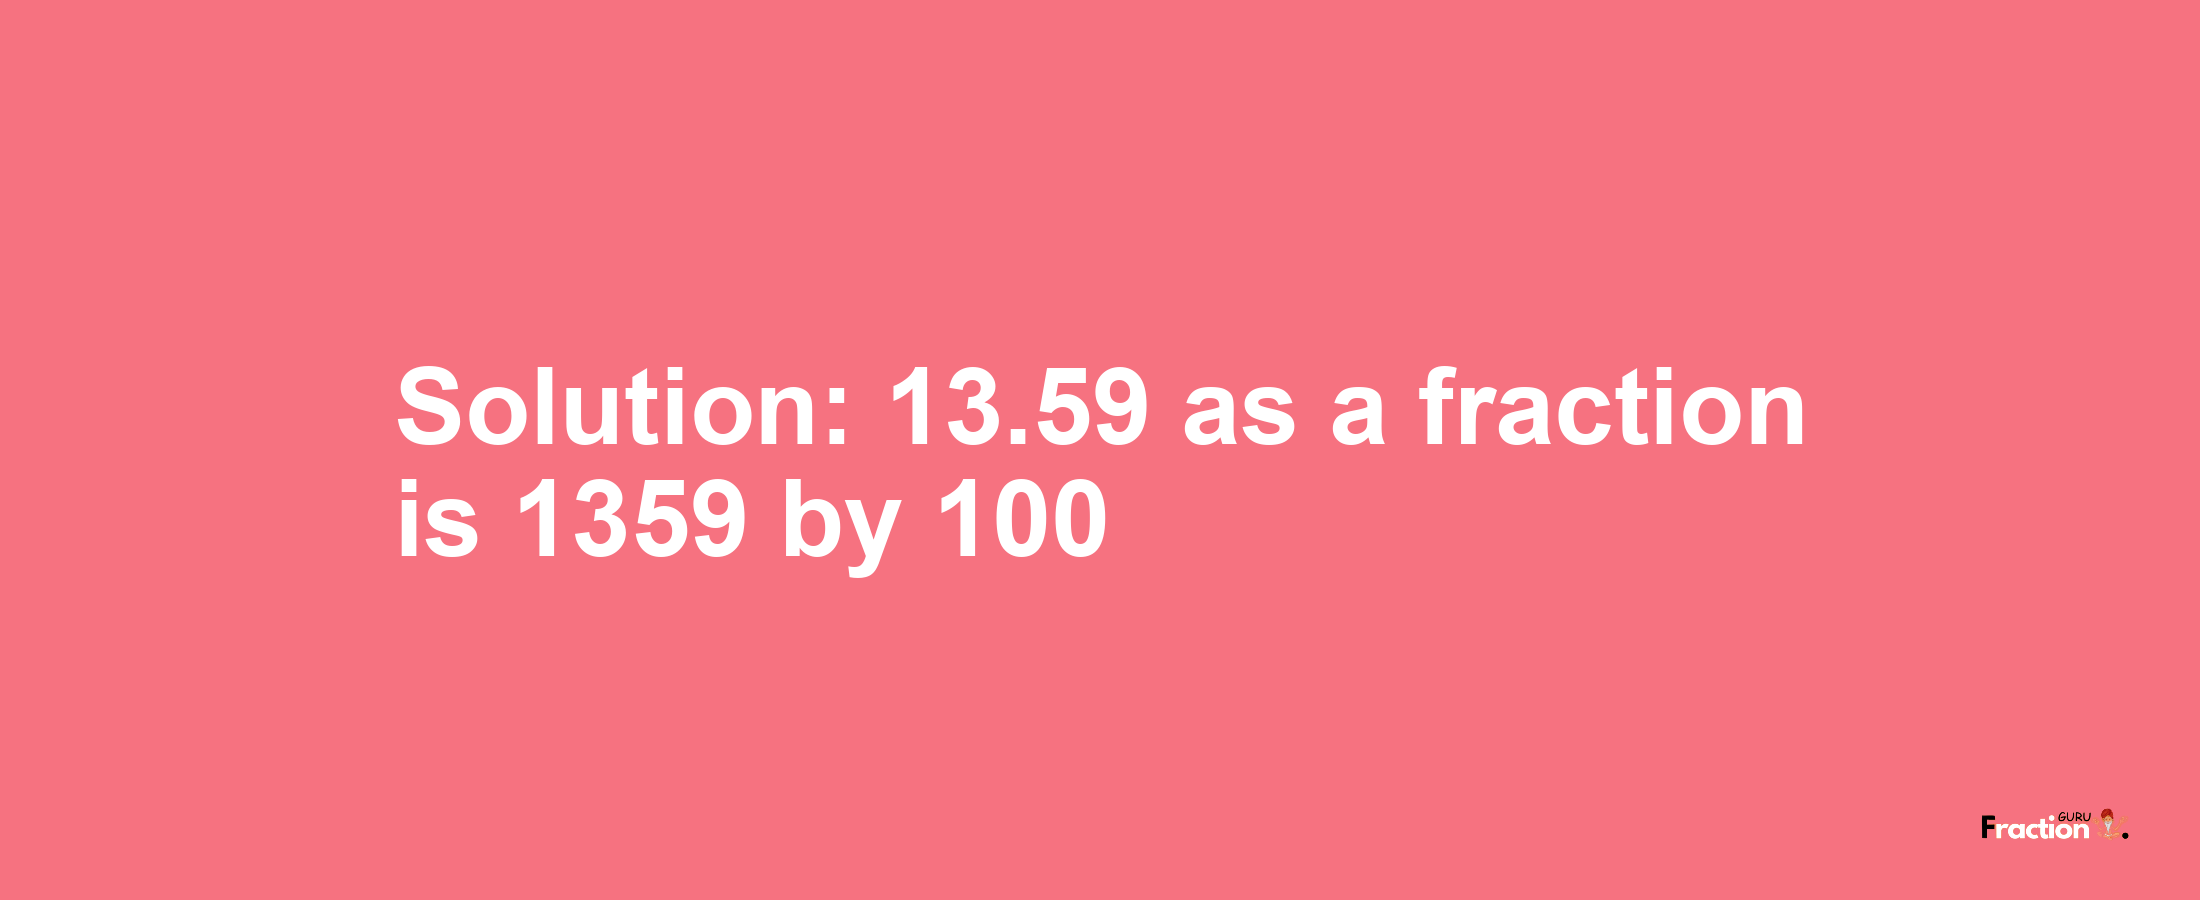 Solution:13.59 as a fraction is 1359/100